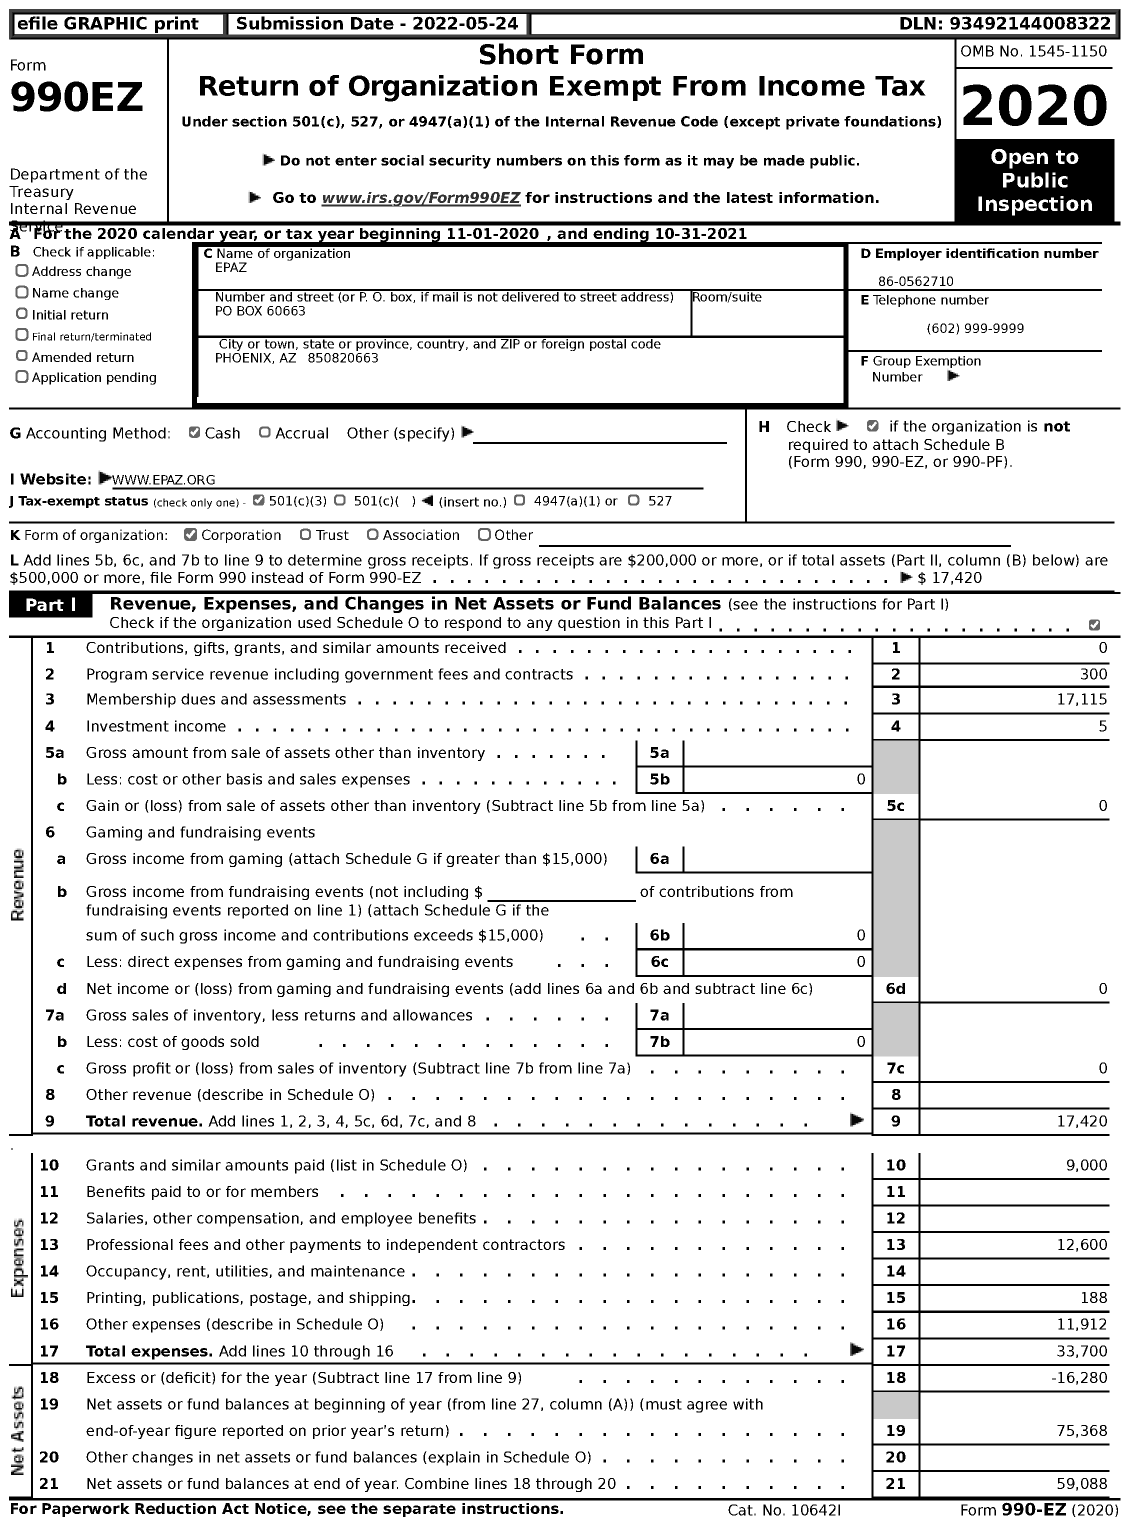 Image of first page of 2020 Form 990EZ for Epaz